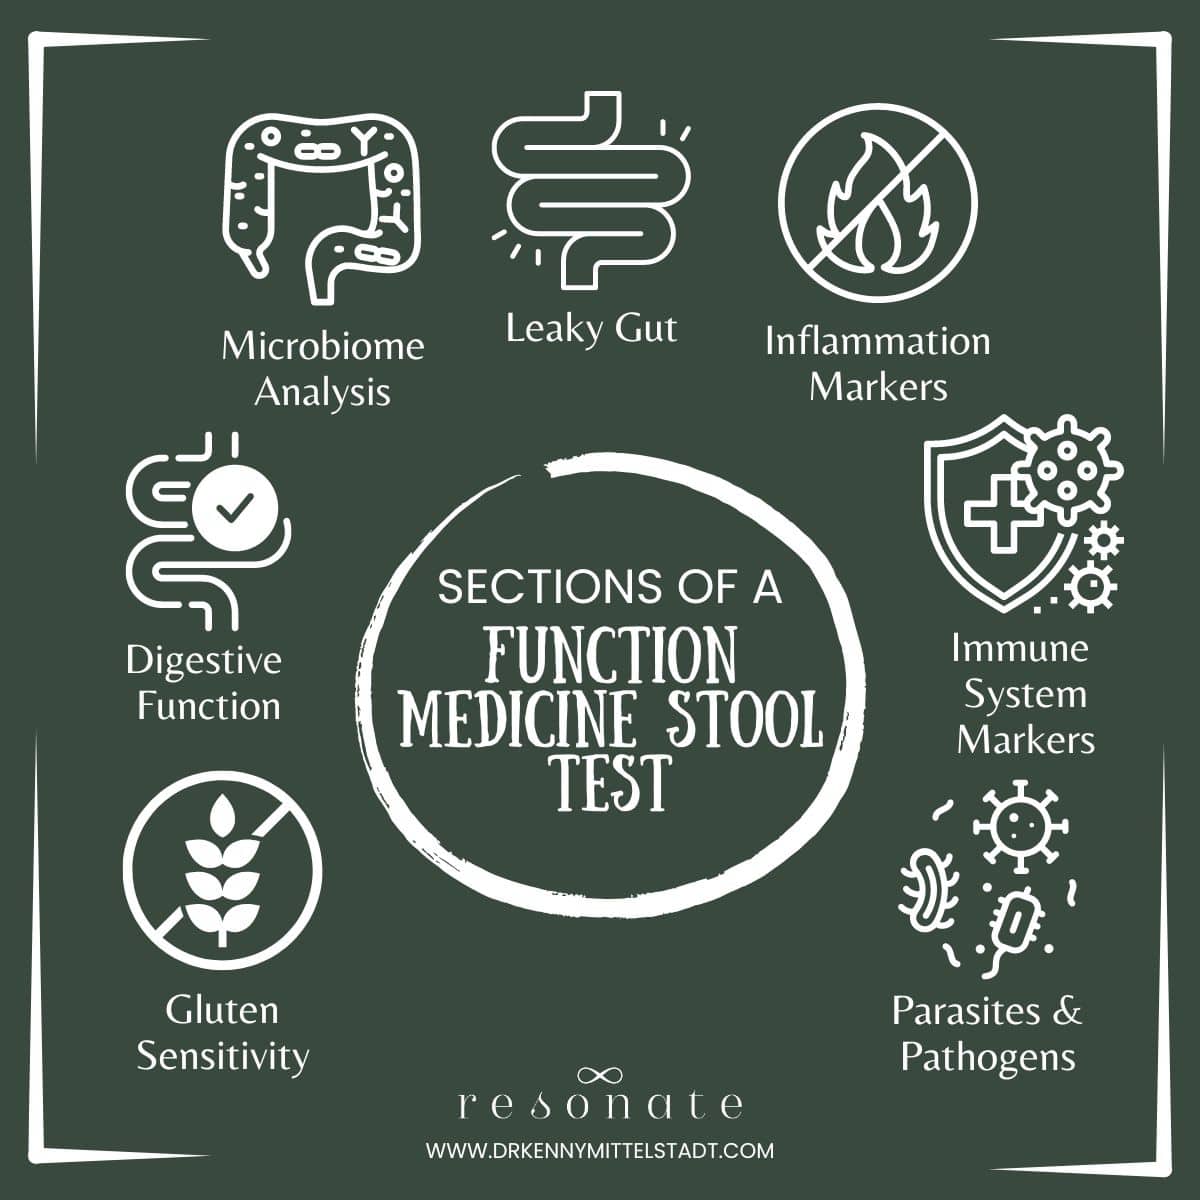 This image shows the 7 sections of a functional medicine stool test that are covered in the body of the blog post including microbiome analysis, digestion function assessment, pathogens and parasites, and more.